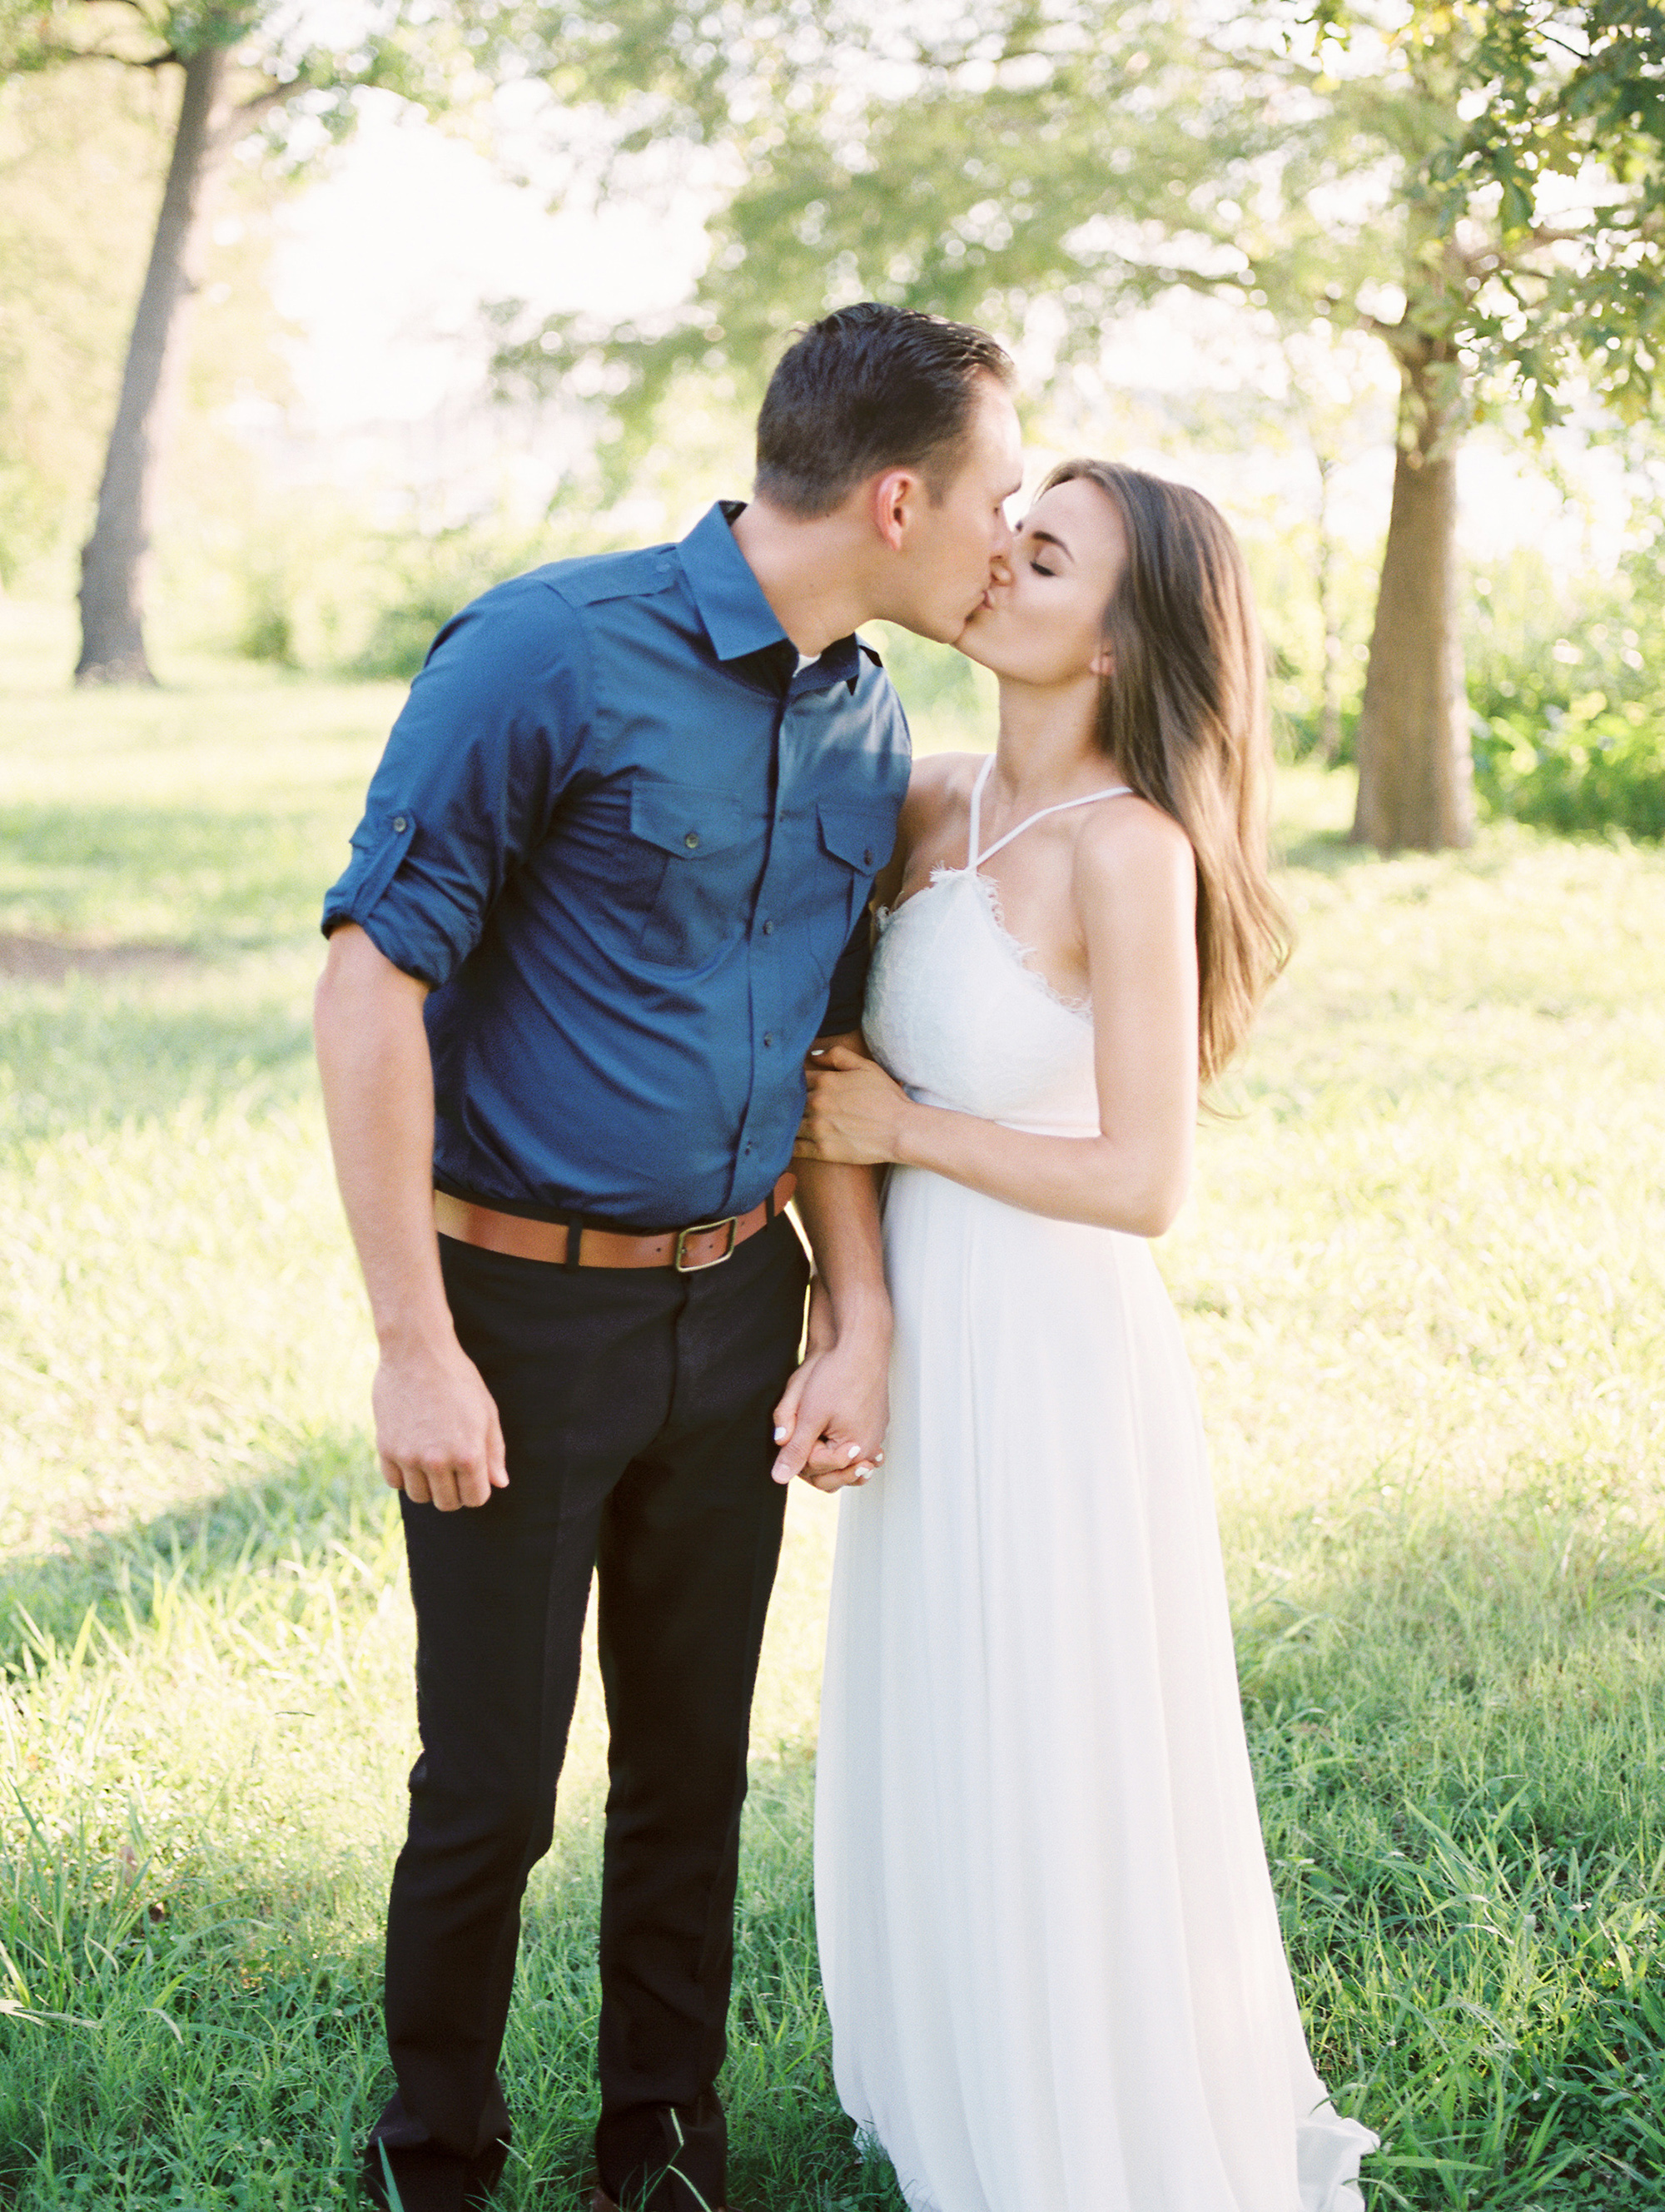 Dallas engagement session at White Rock Lake by Texas wedding photographer Tenth & Grace.